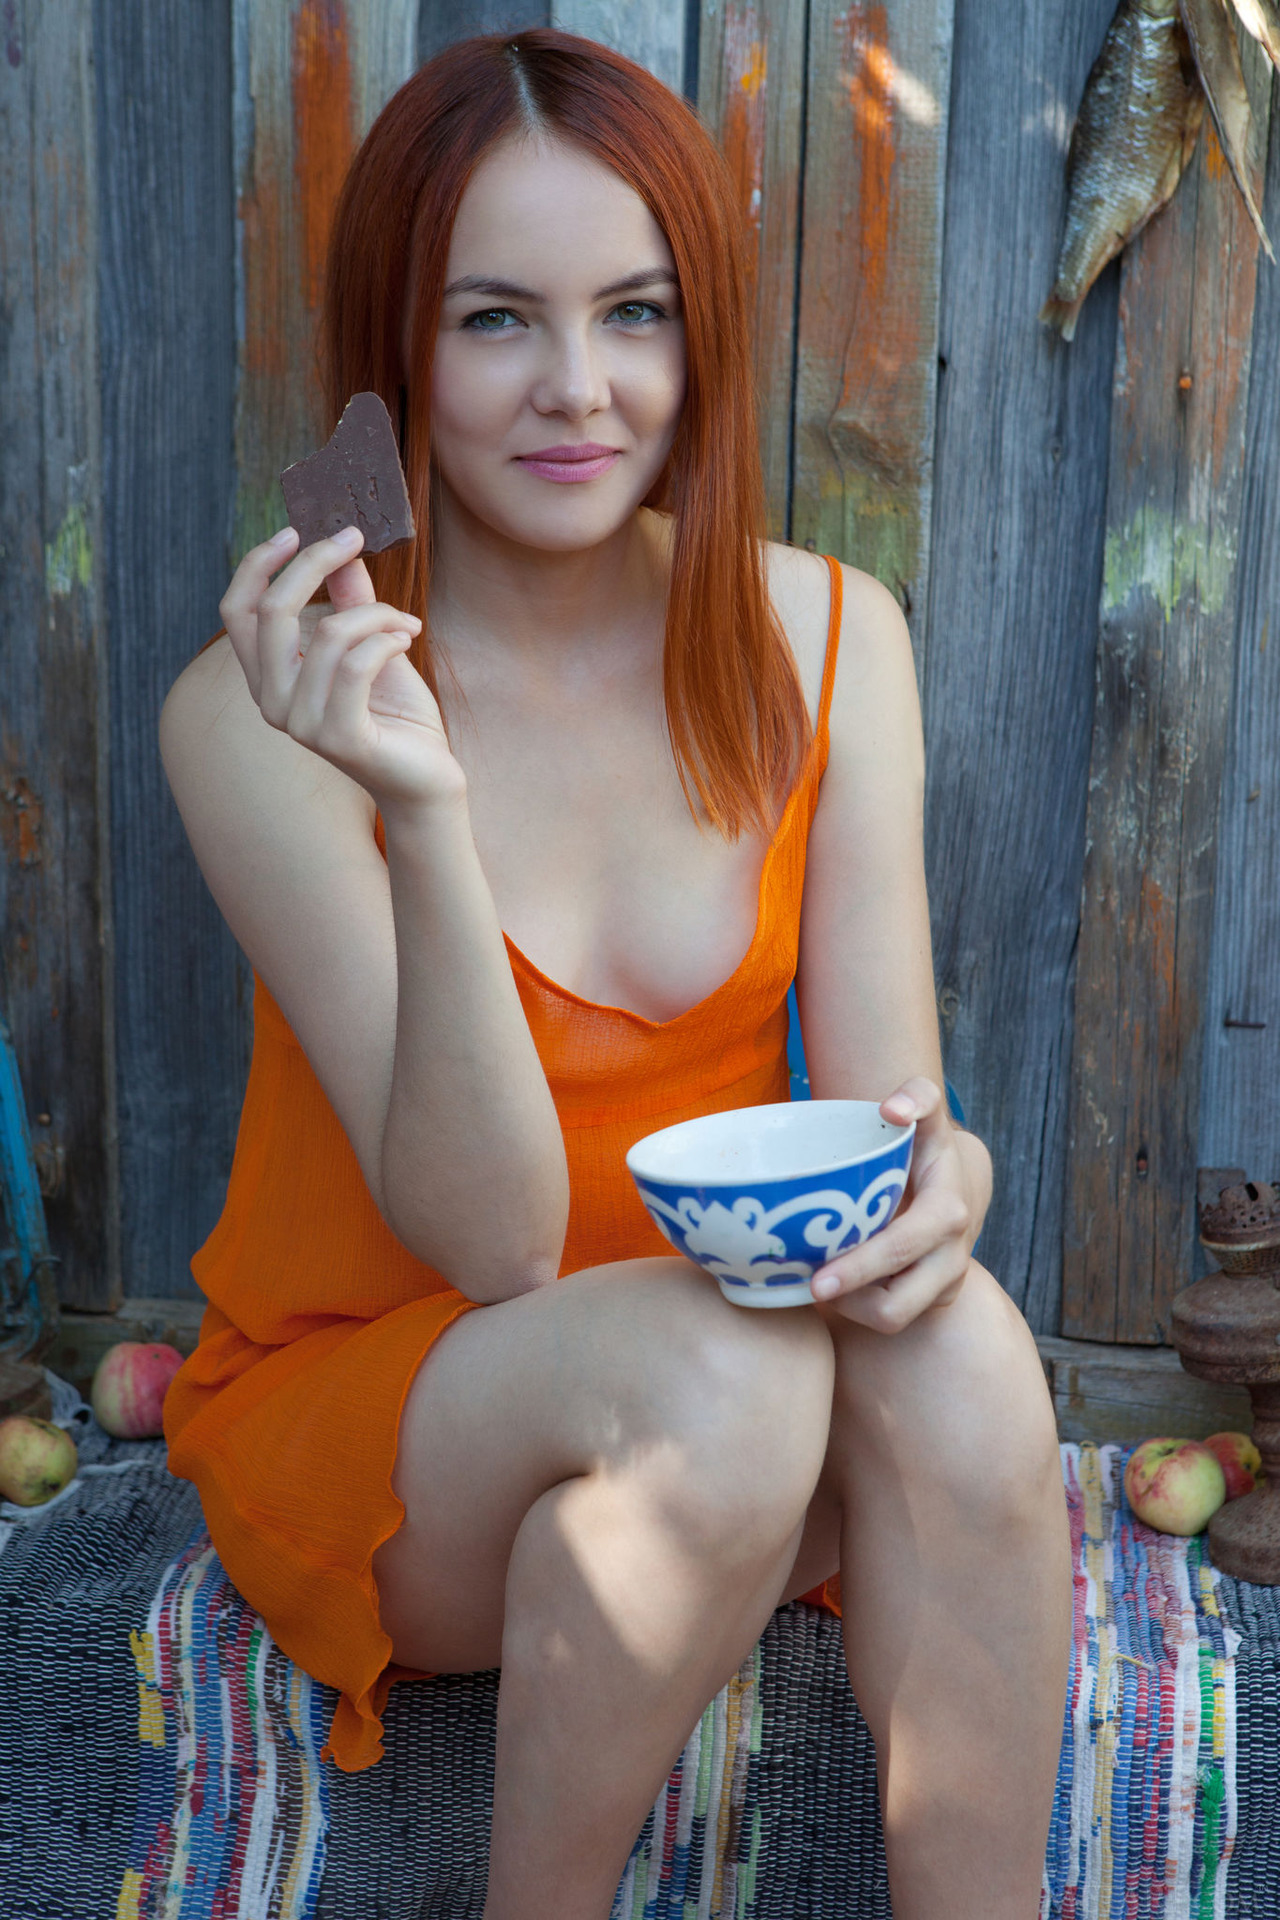 Sexy redhead Shaya lets her bright orange dress slip down to bare her gorgeous breasts 02